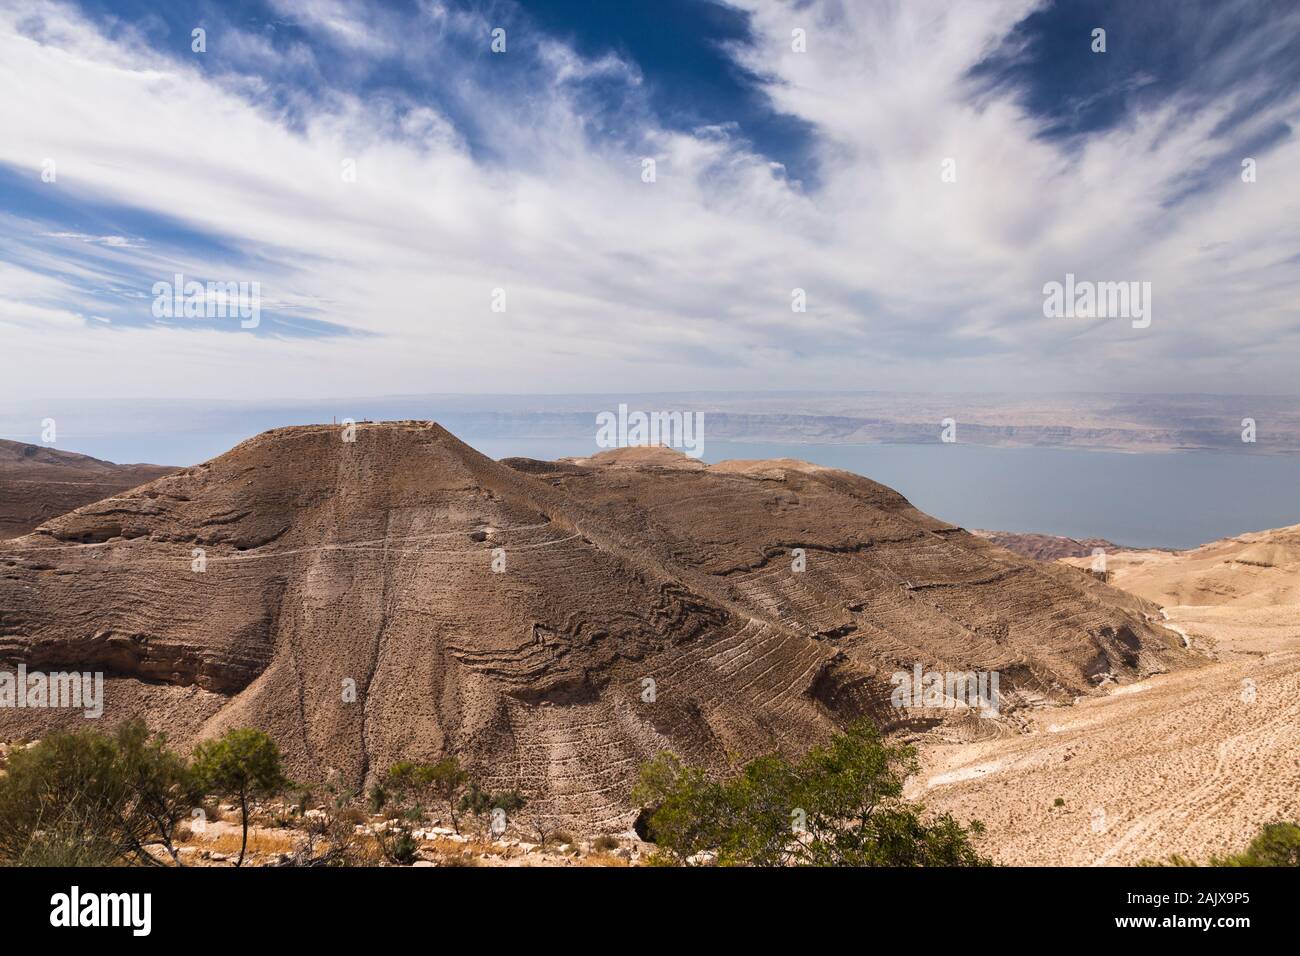 Fortress of Machaerus, Mukawir, and dead sea, castle of Herod the Great, Salome dancing site, Madaba, Jordan, middle east, Asia Stock Photo